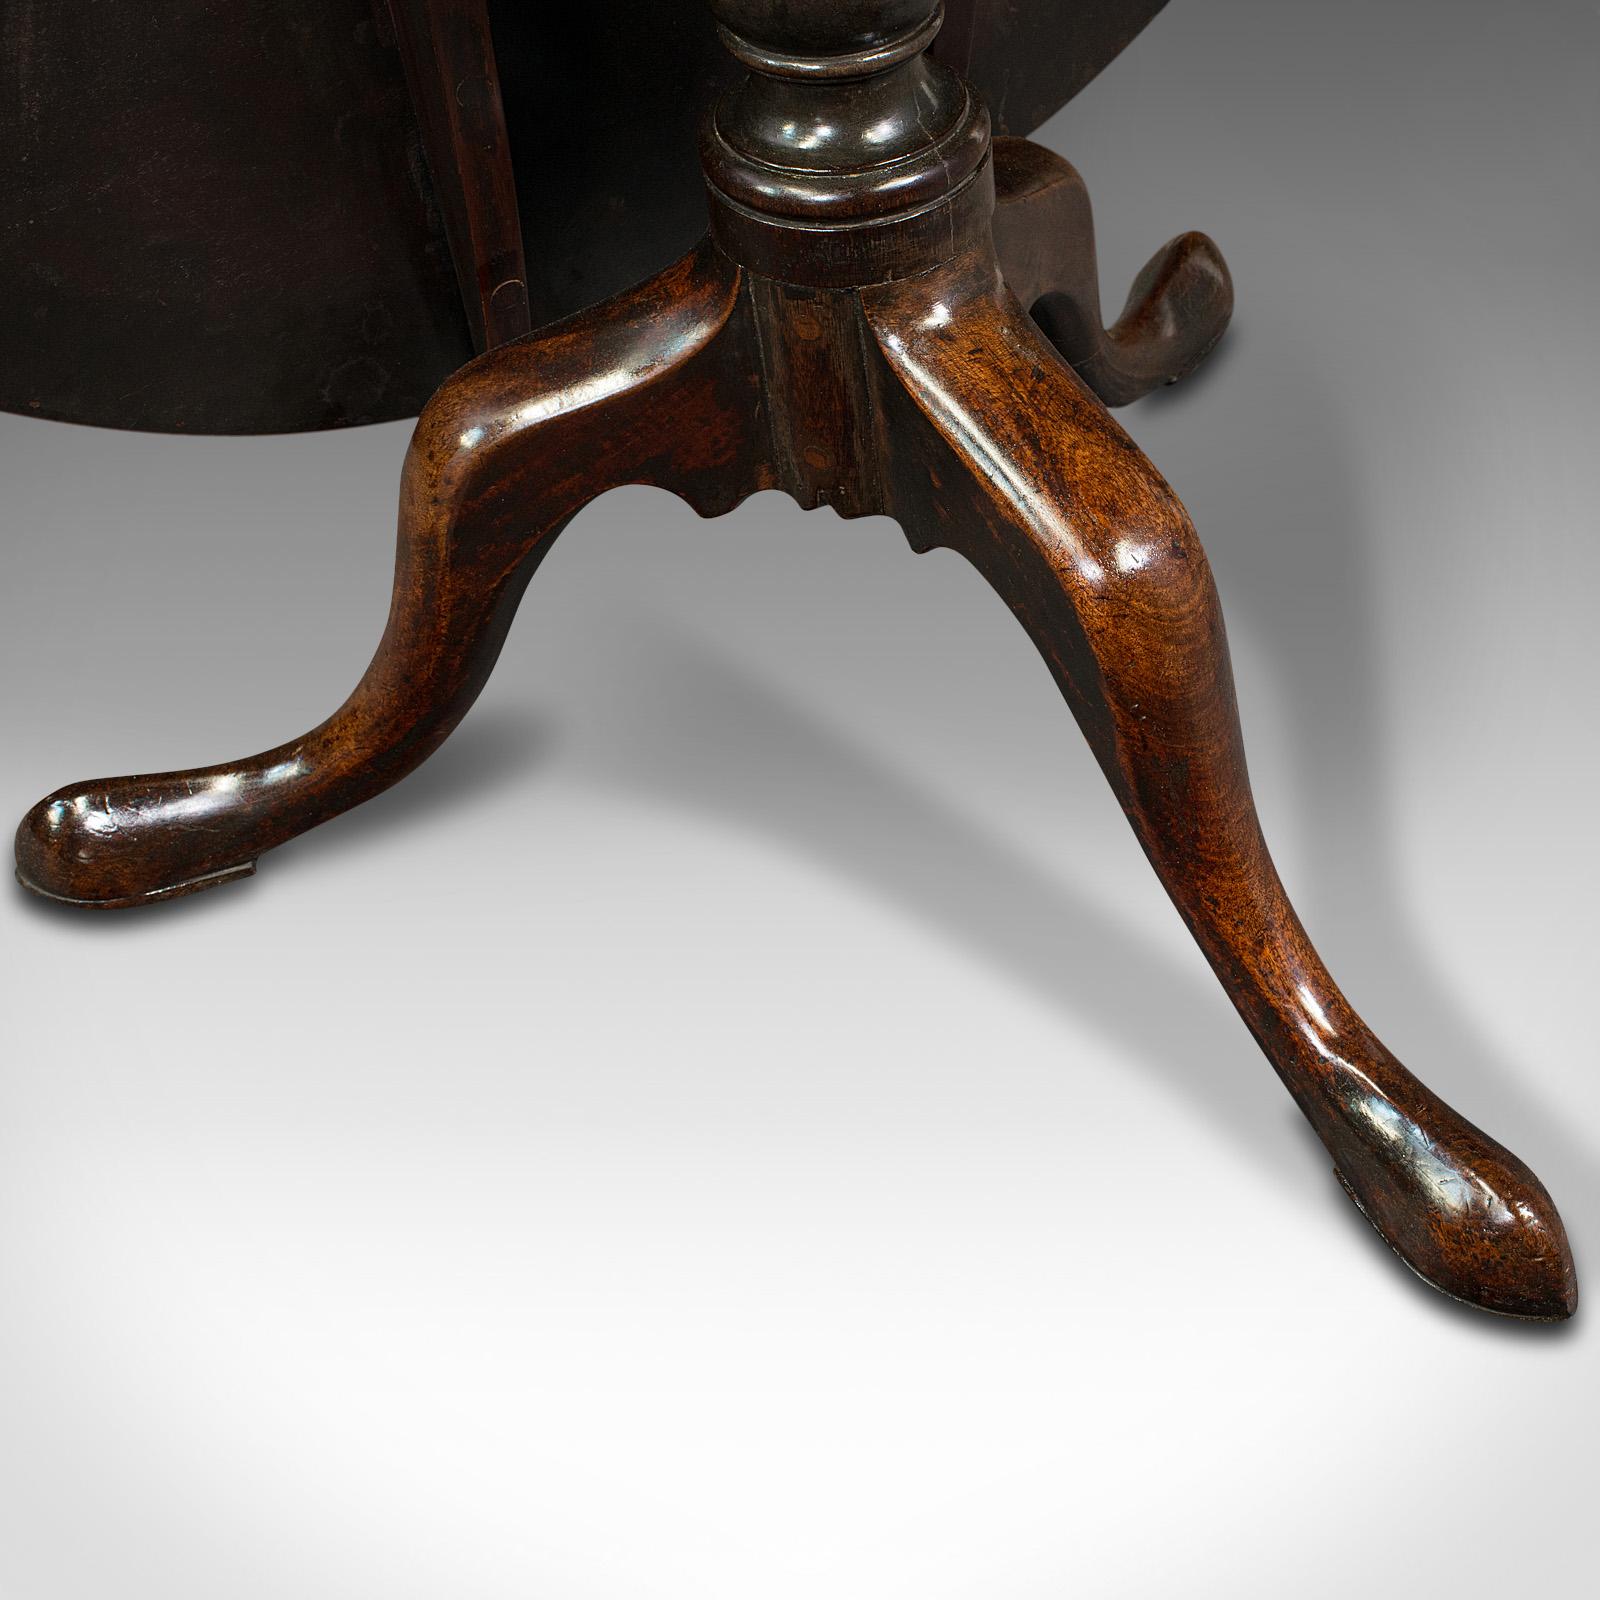 Antique Tilt Top Table, English, Wine, Afternoon Tea, Early Georgian, Circa 1750 For Sale 3